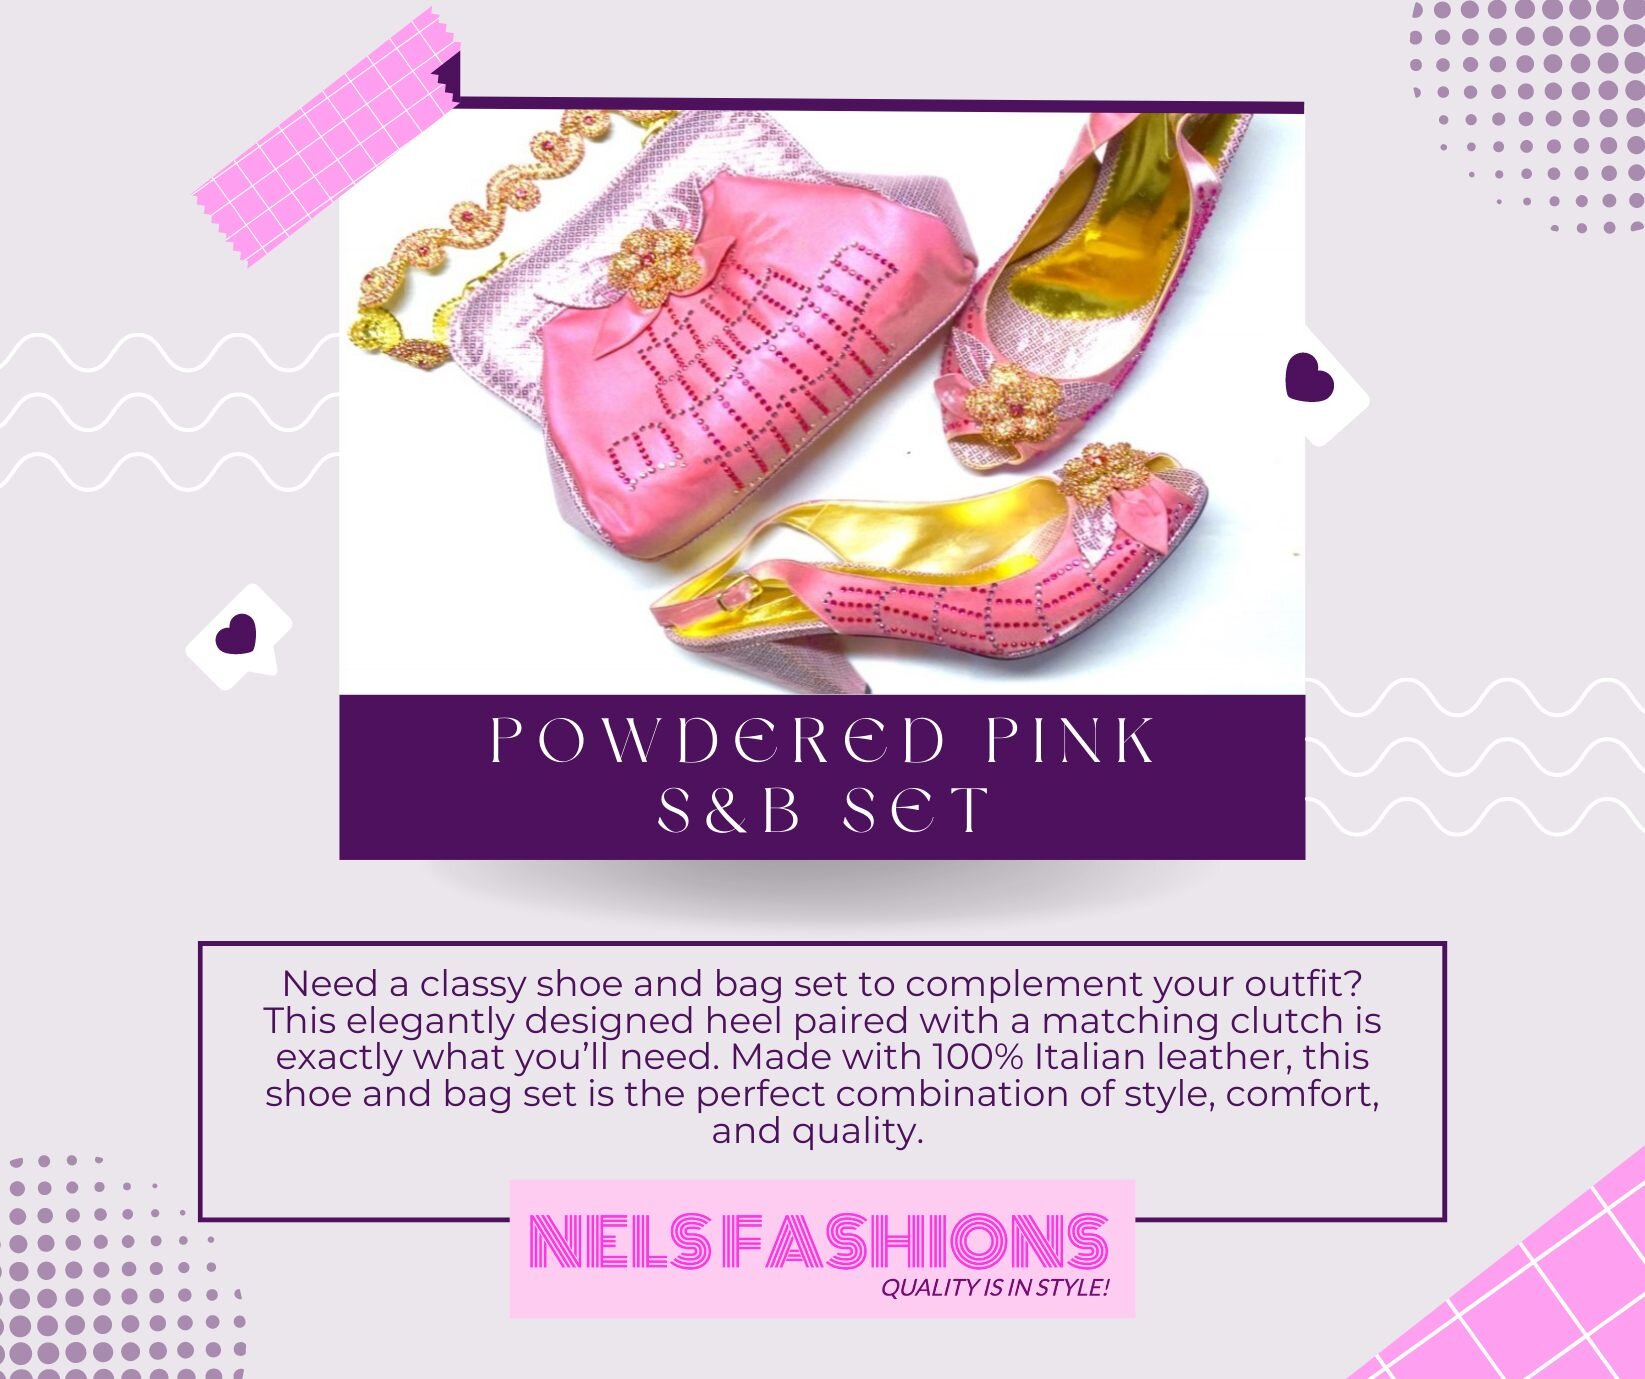 👠👜 New Arrival Alert! 👀✨ Get ready to slay the fashion game with our stunning Nigerian-inspired shoe and bag set. 🇳🇬💃 Step into elegance with these vibrant designs, crafted with love and attention to detail. 💖🎉 Whether you're attending a wedd